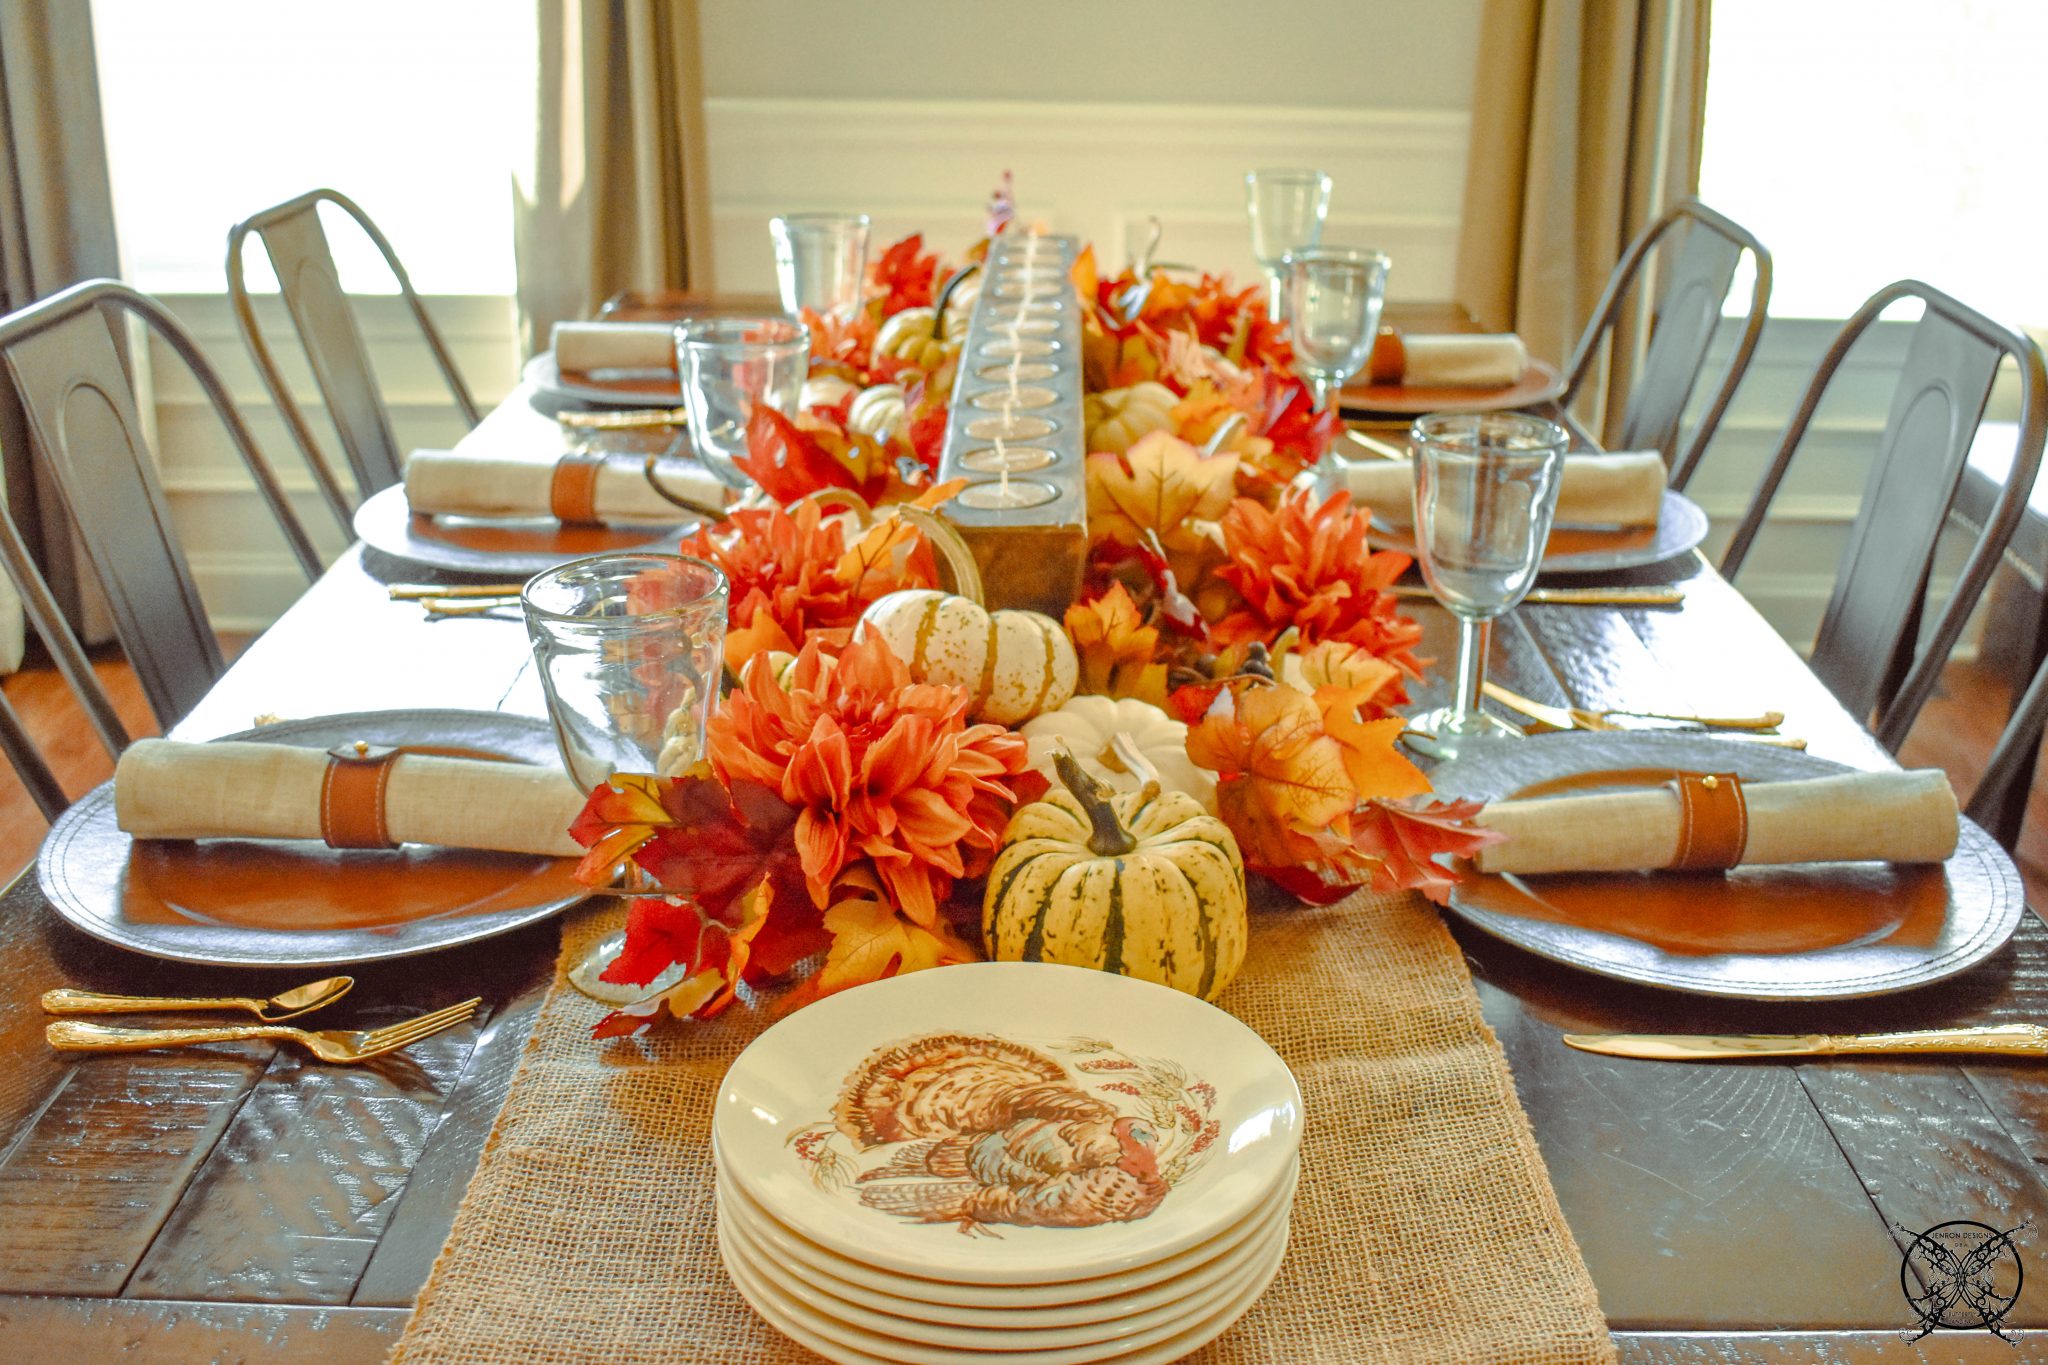 Tips for Setting a Thanksgiving Table - JENRON DESIGNS